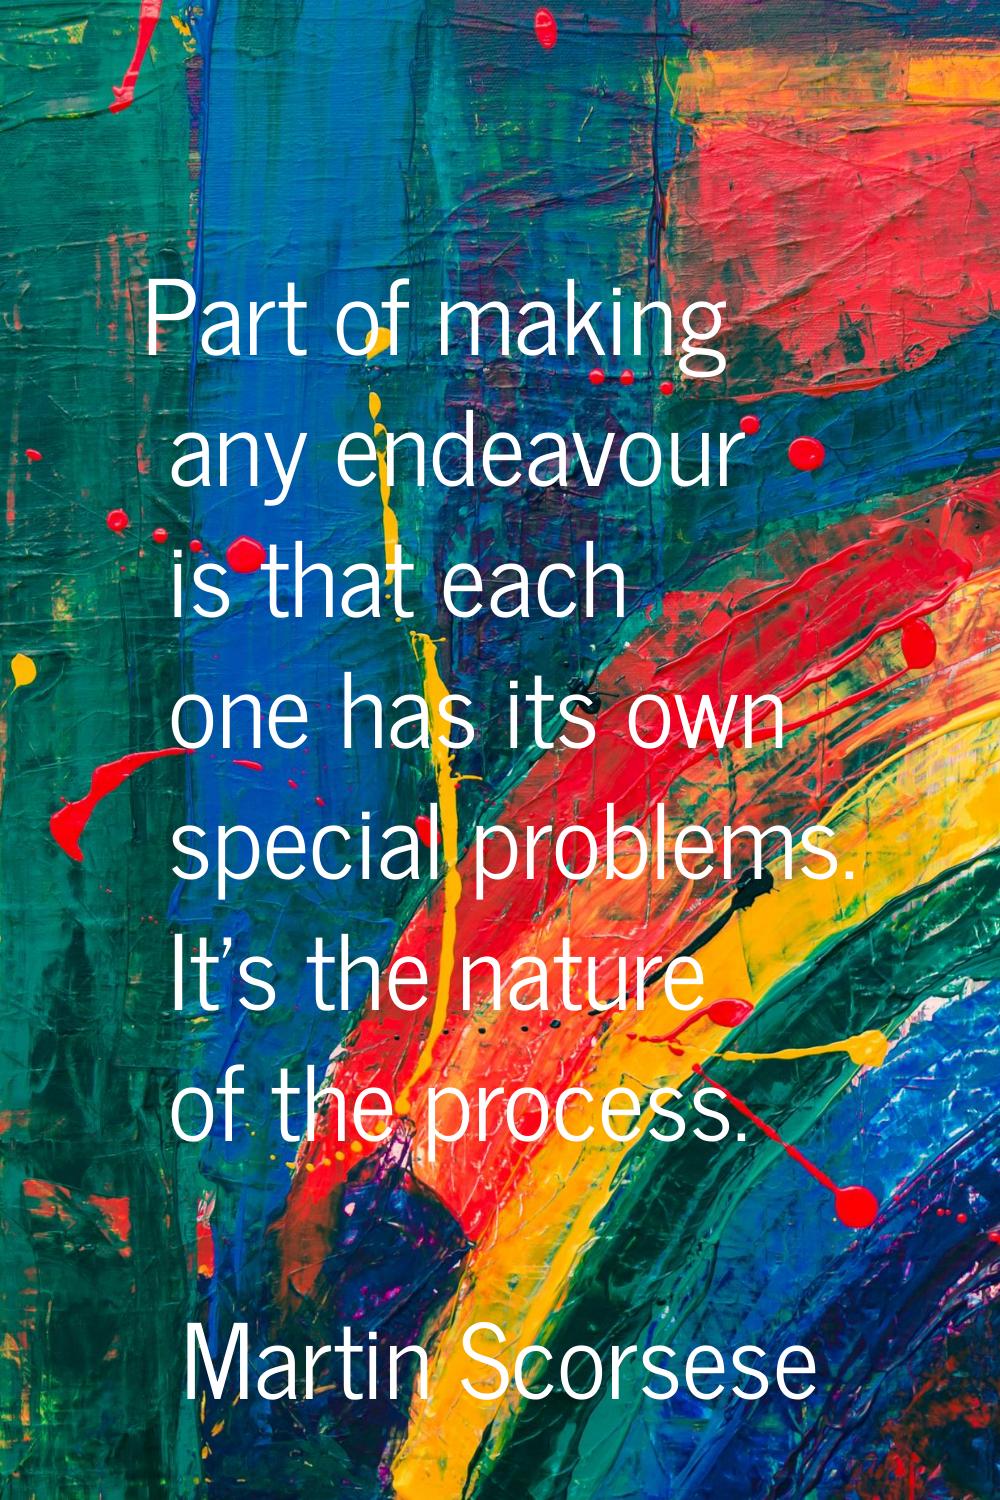 Part of making any endeavour is that each one has its own special problems. It's the nature of the 